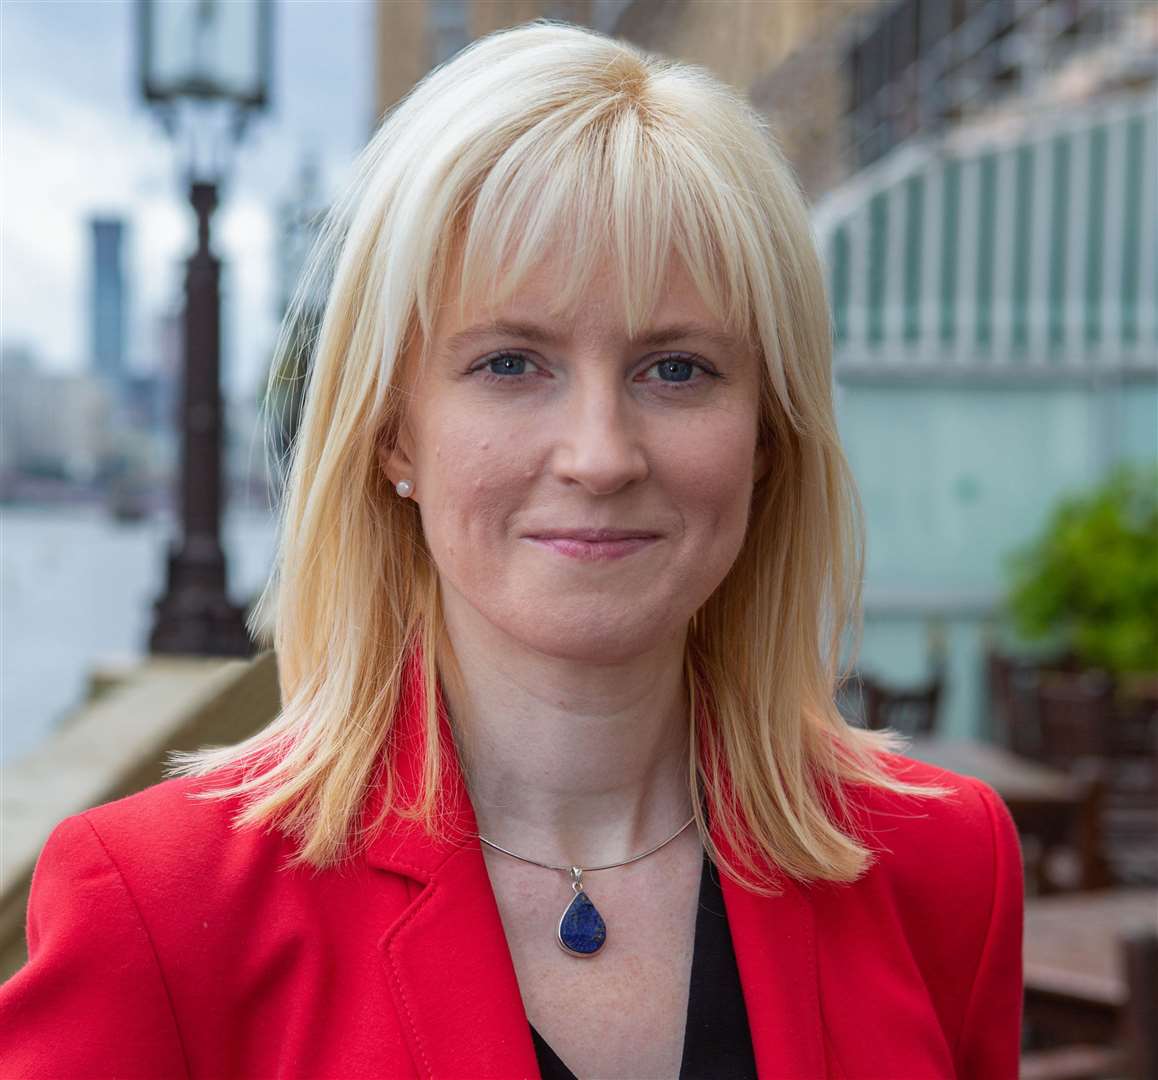 Rosie Duffield said she is dealing with a "remarkable increase" in communication from locals about anti-social behaviour and drug use